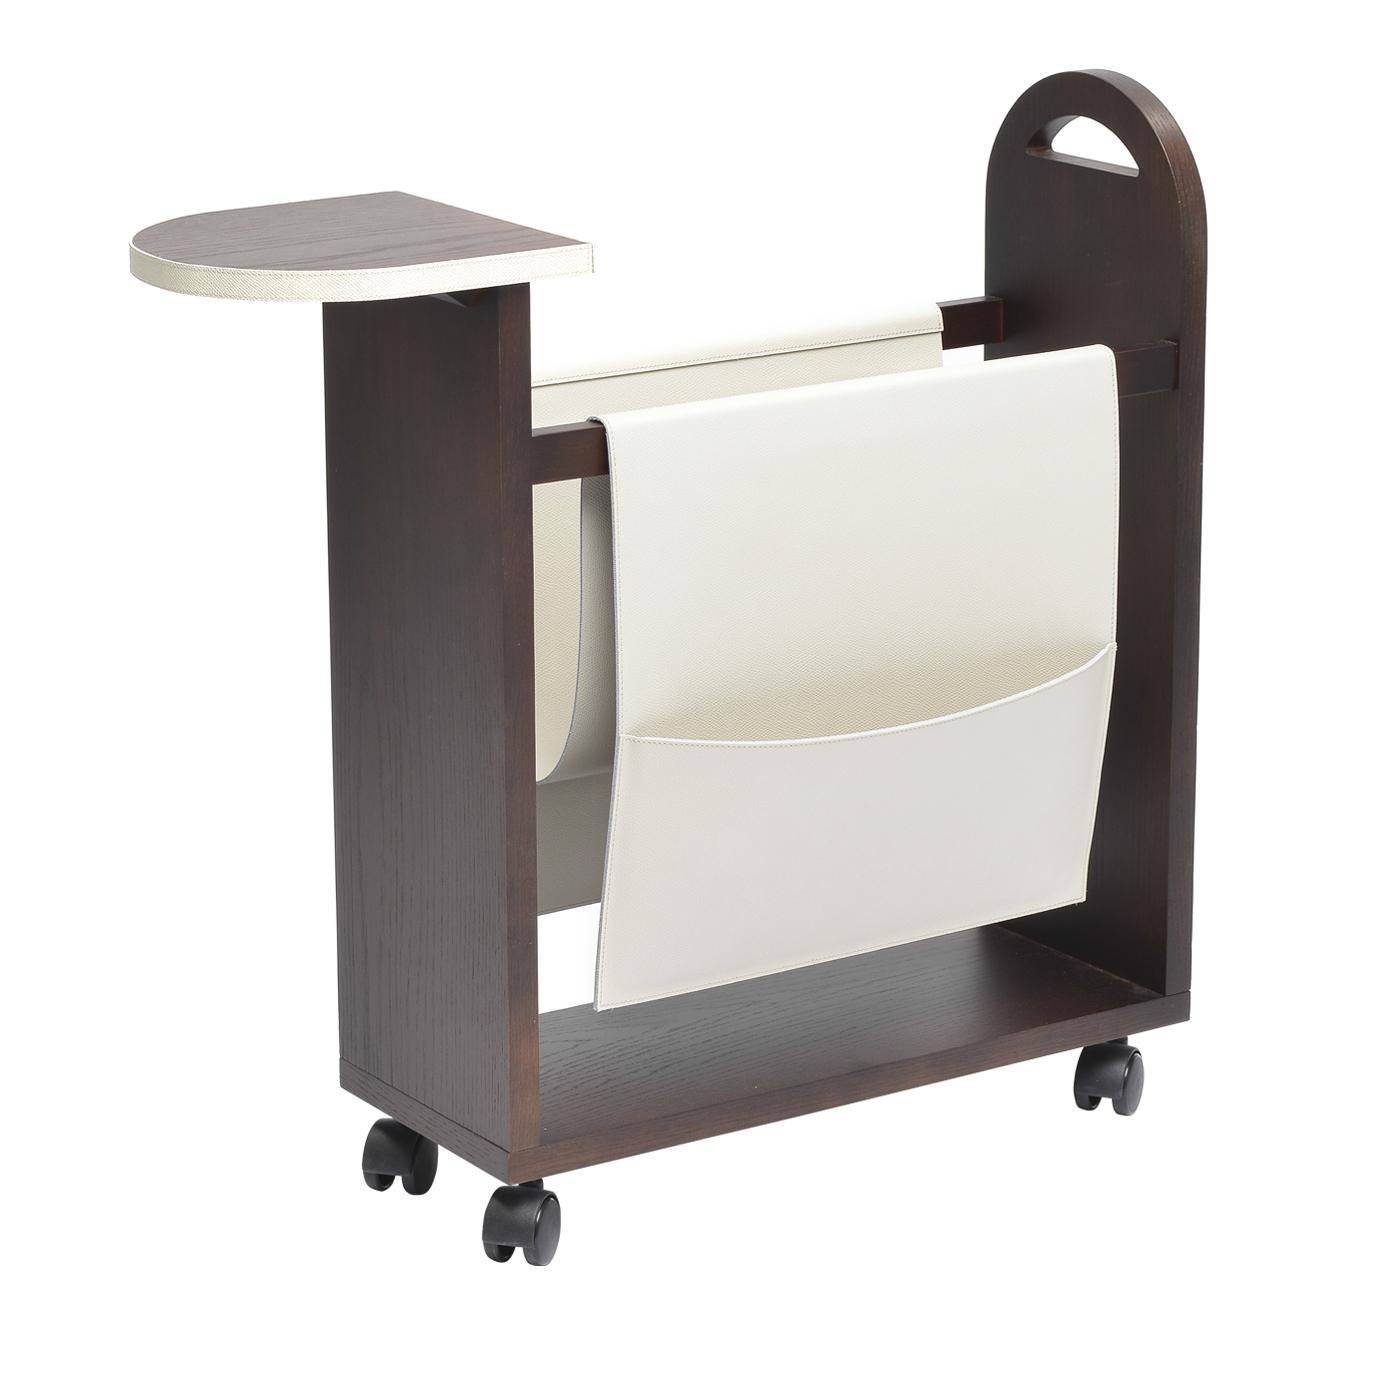 This elegant and extremely versatile piece is a magazine rack made in durmast wood with two large side pockets, one small back pocket and one front shelf in leather that can be either in calfskin with water- and scratch-resistant finish, or in